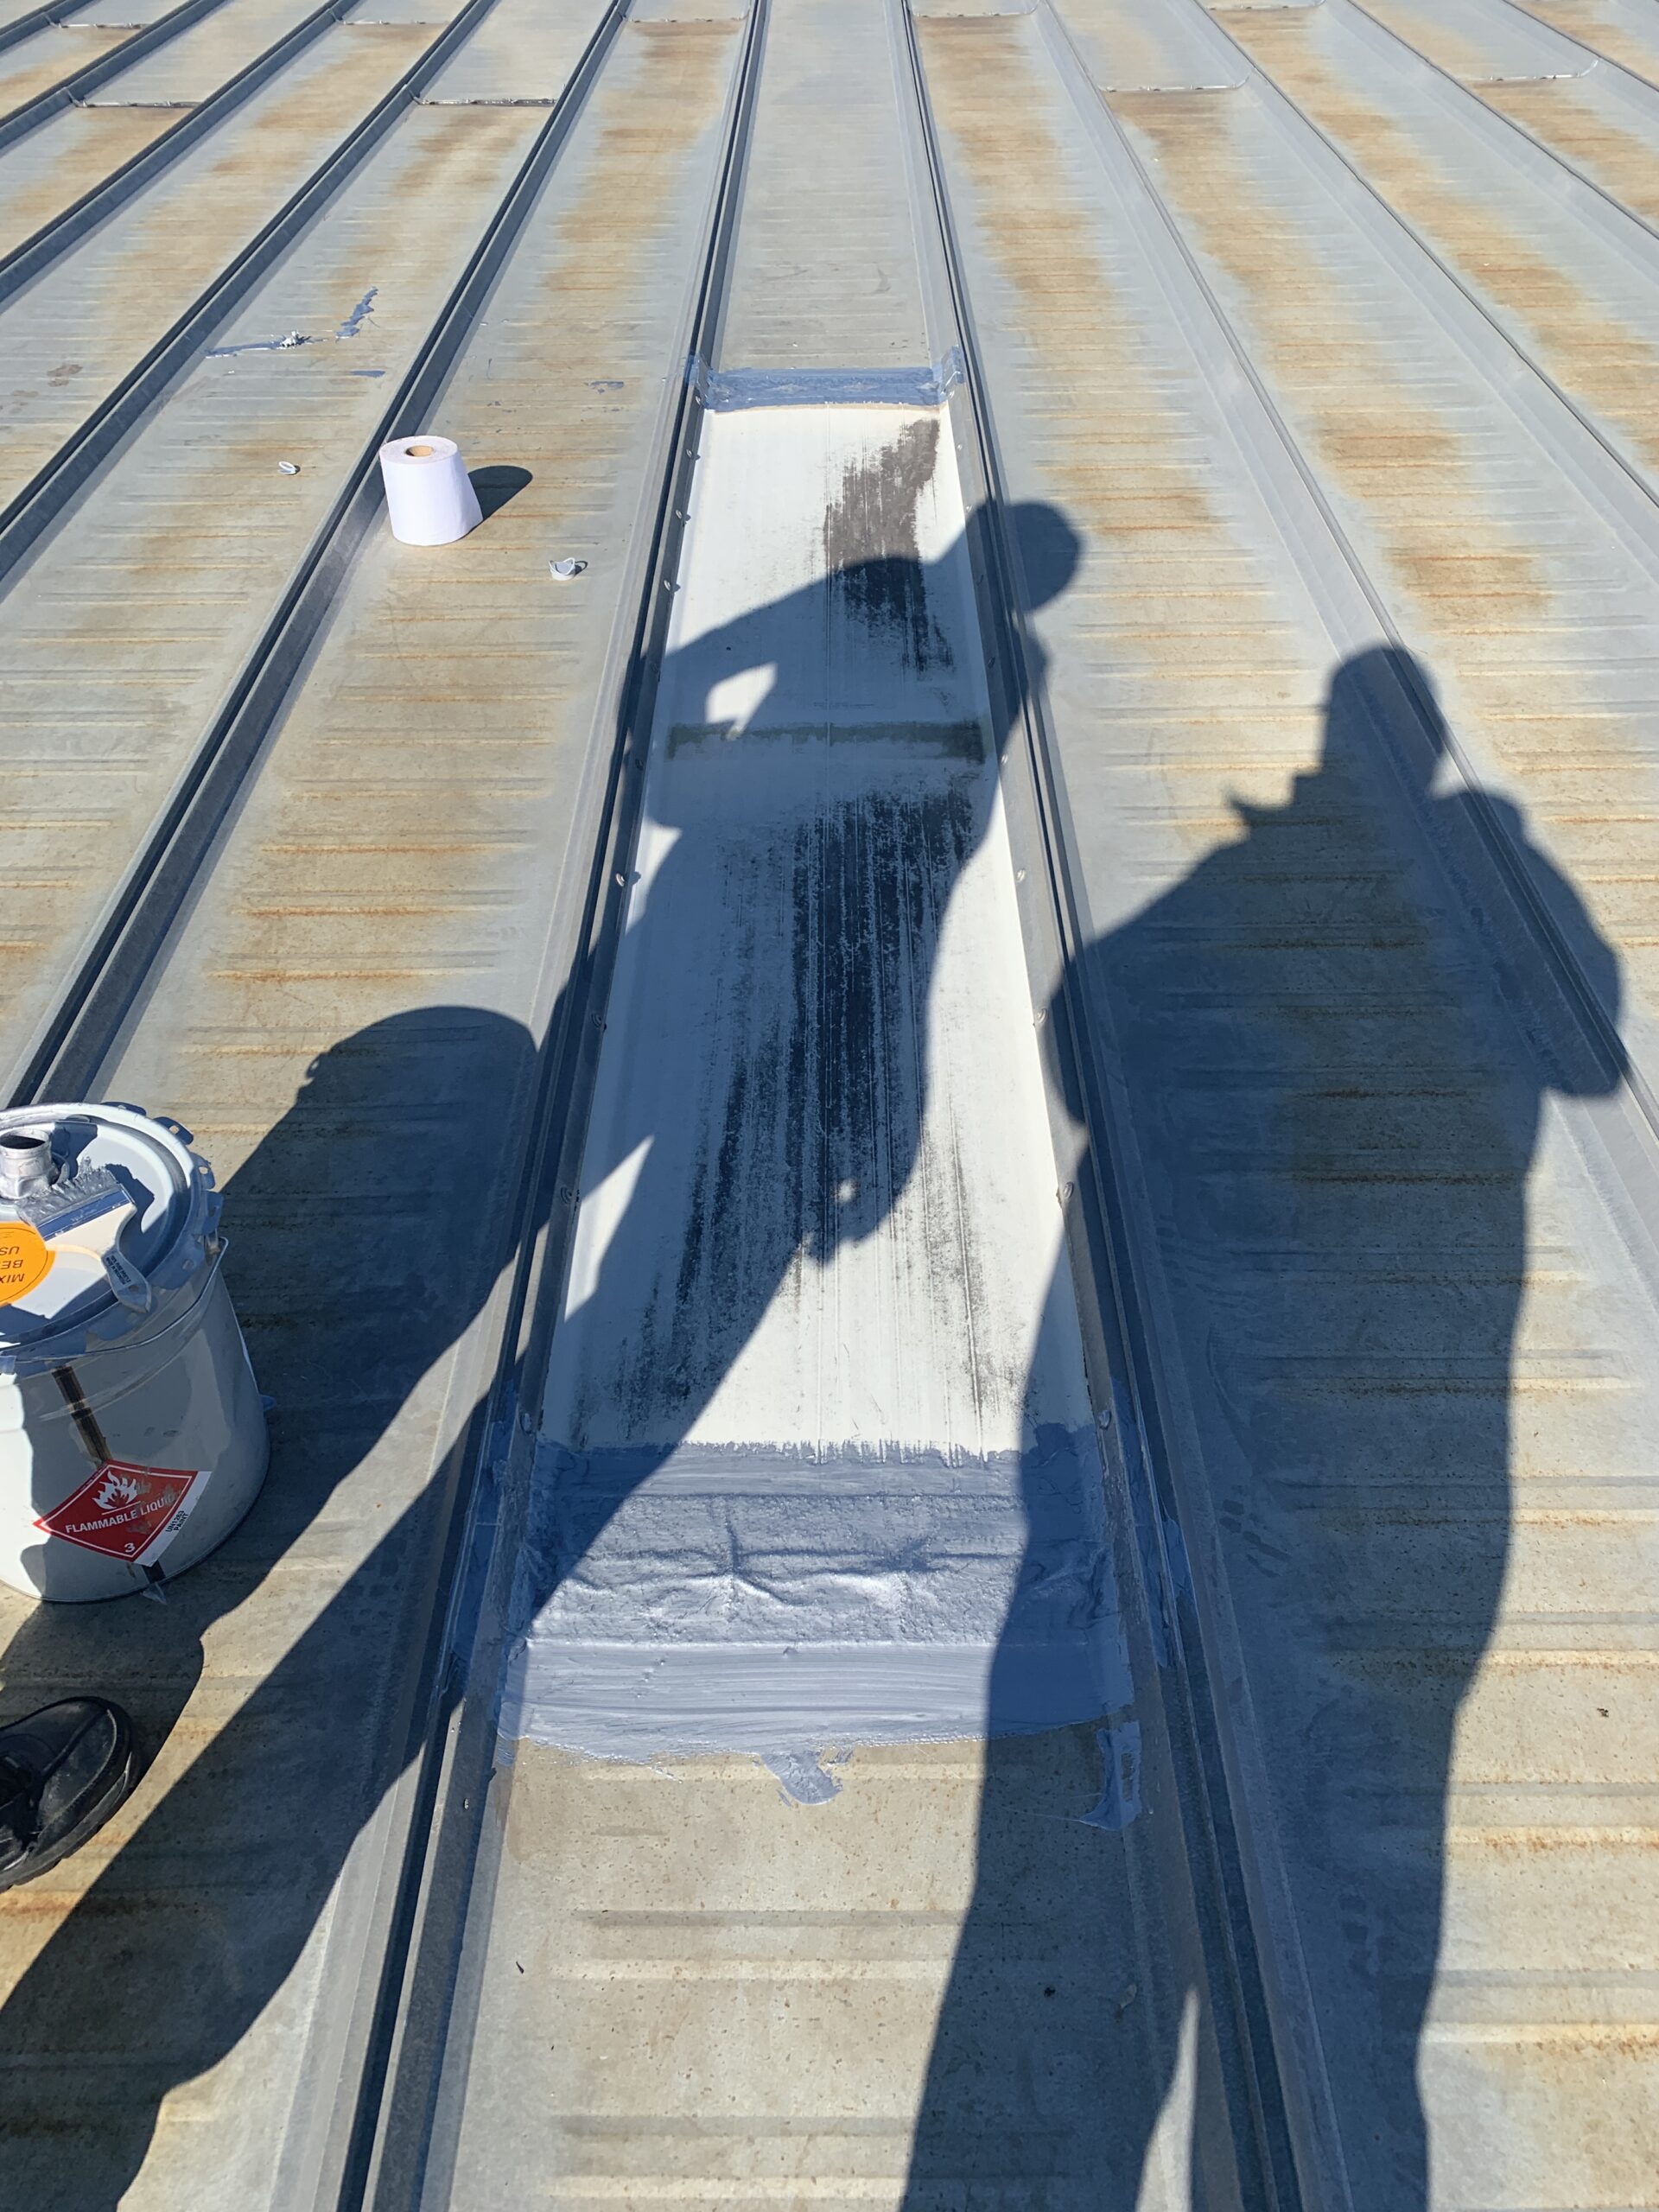 this is the aldo 385 product coating around an old skylight on a metal roof